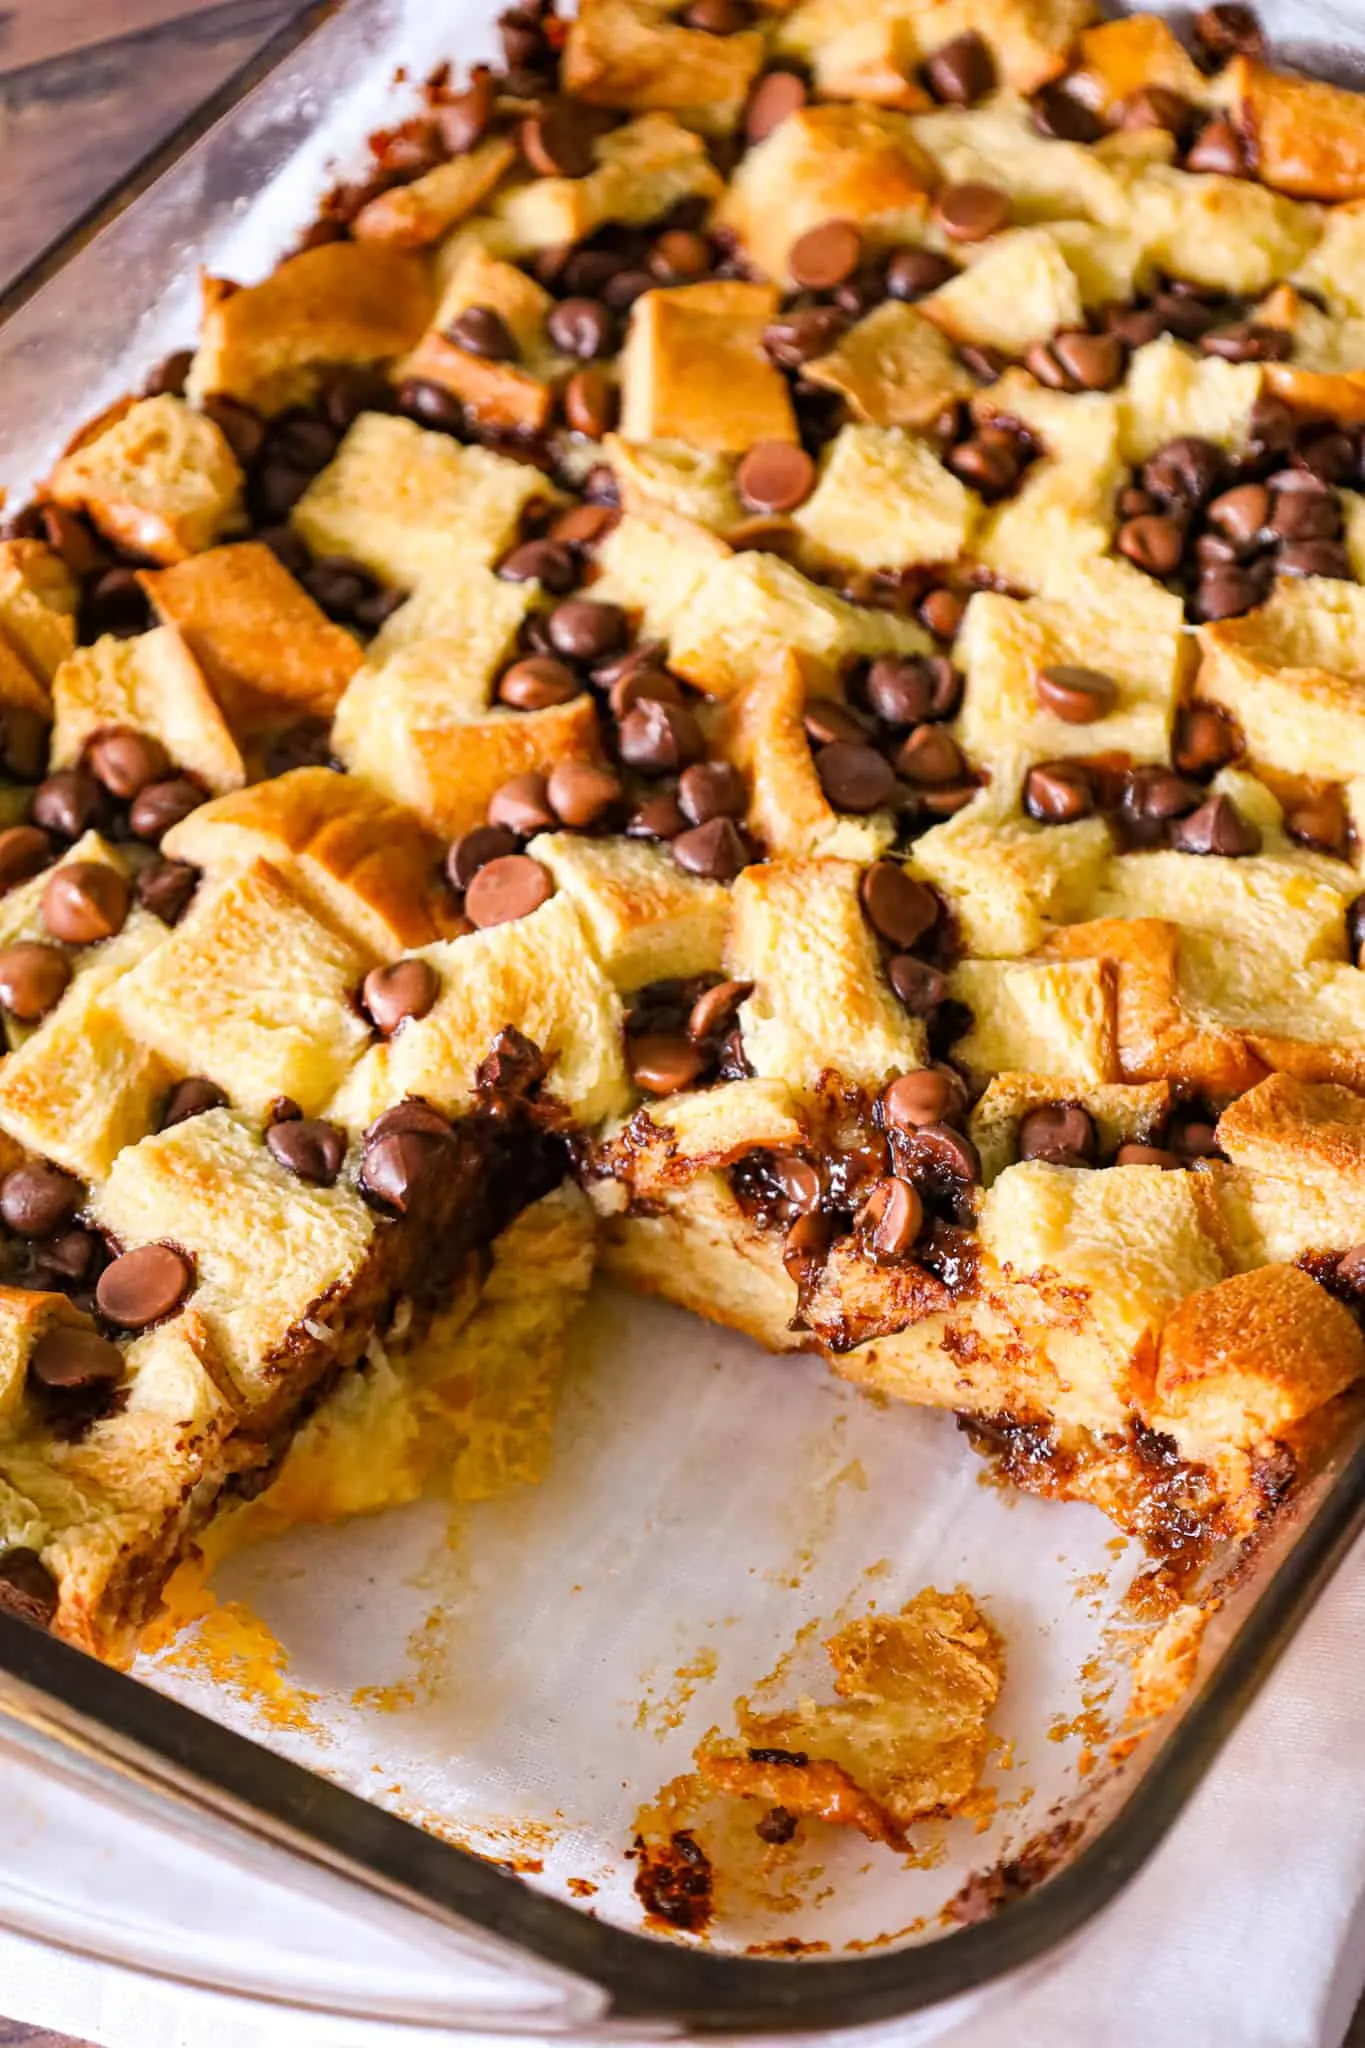 Chocolate Chip Bread Pudding is an easy dessert recipe using brioche bread and loaded with semi sweet and milk chocolate chips.